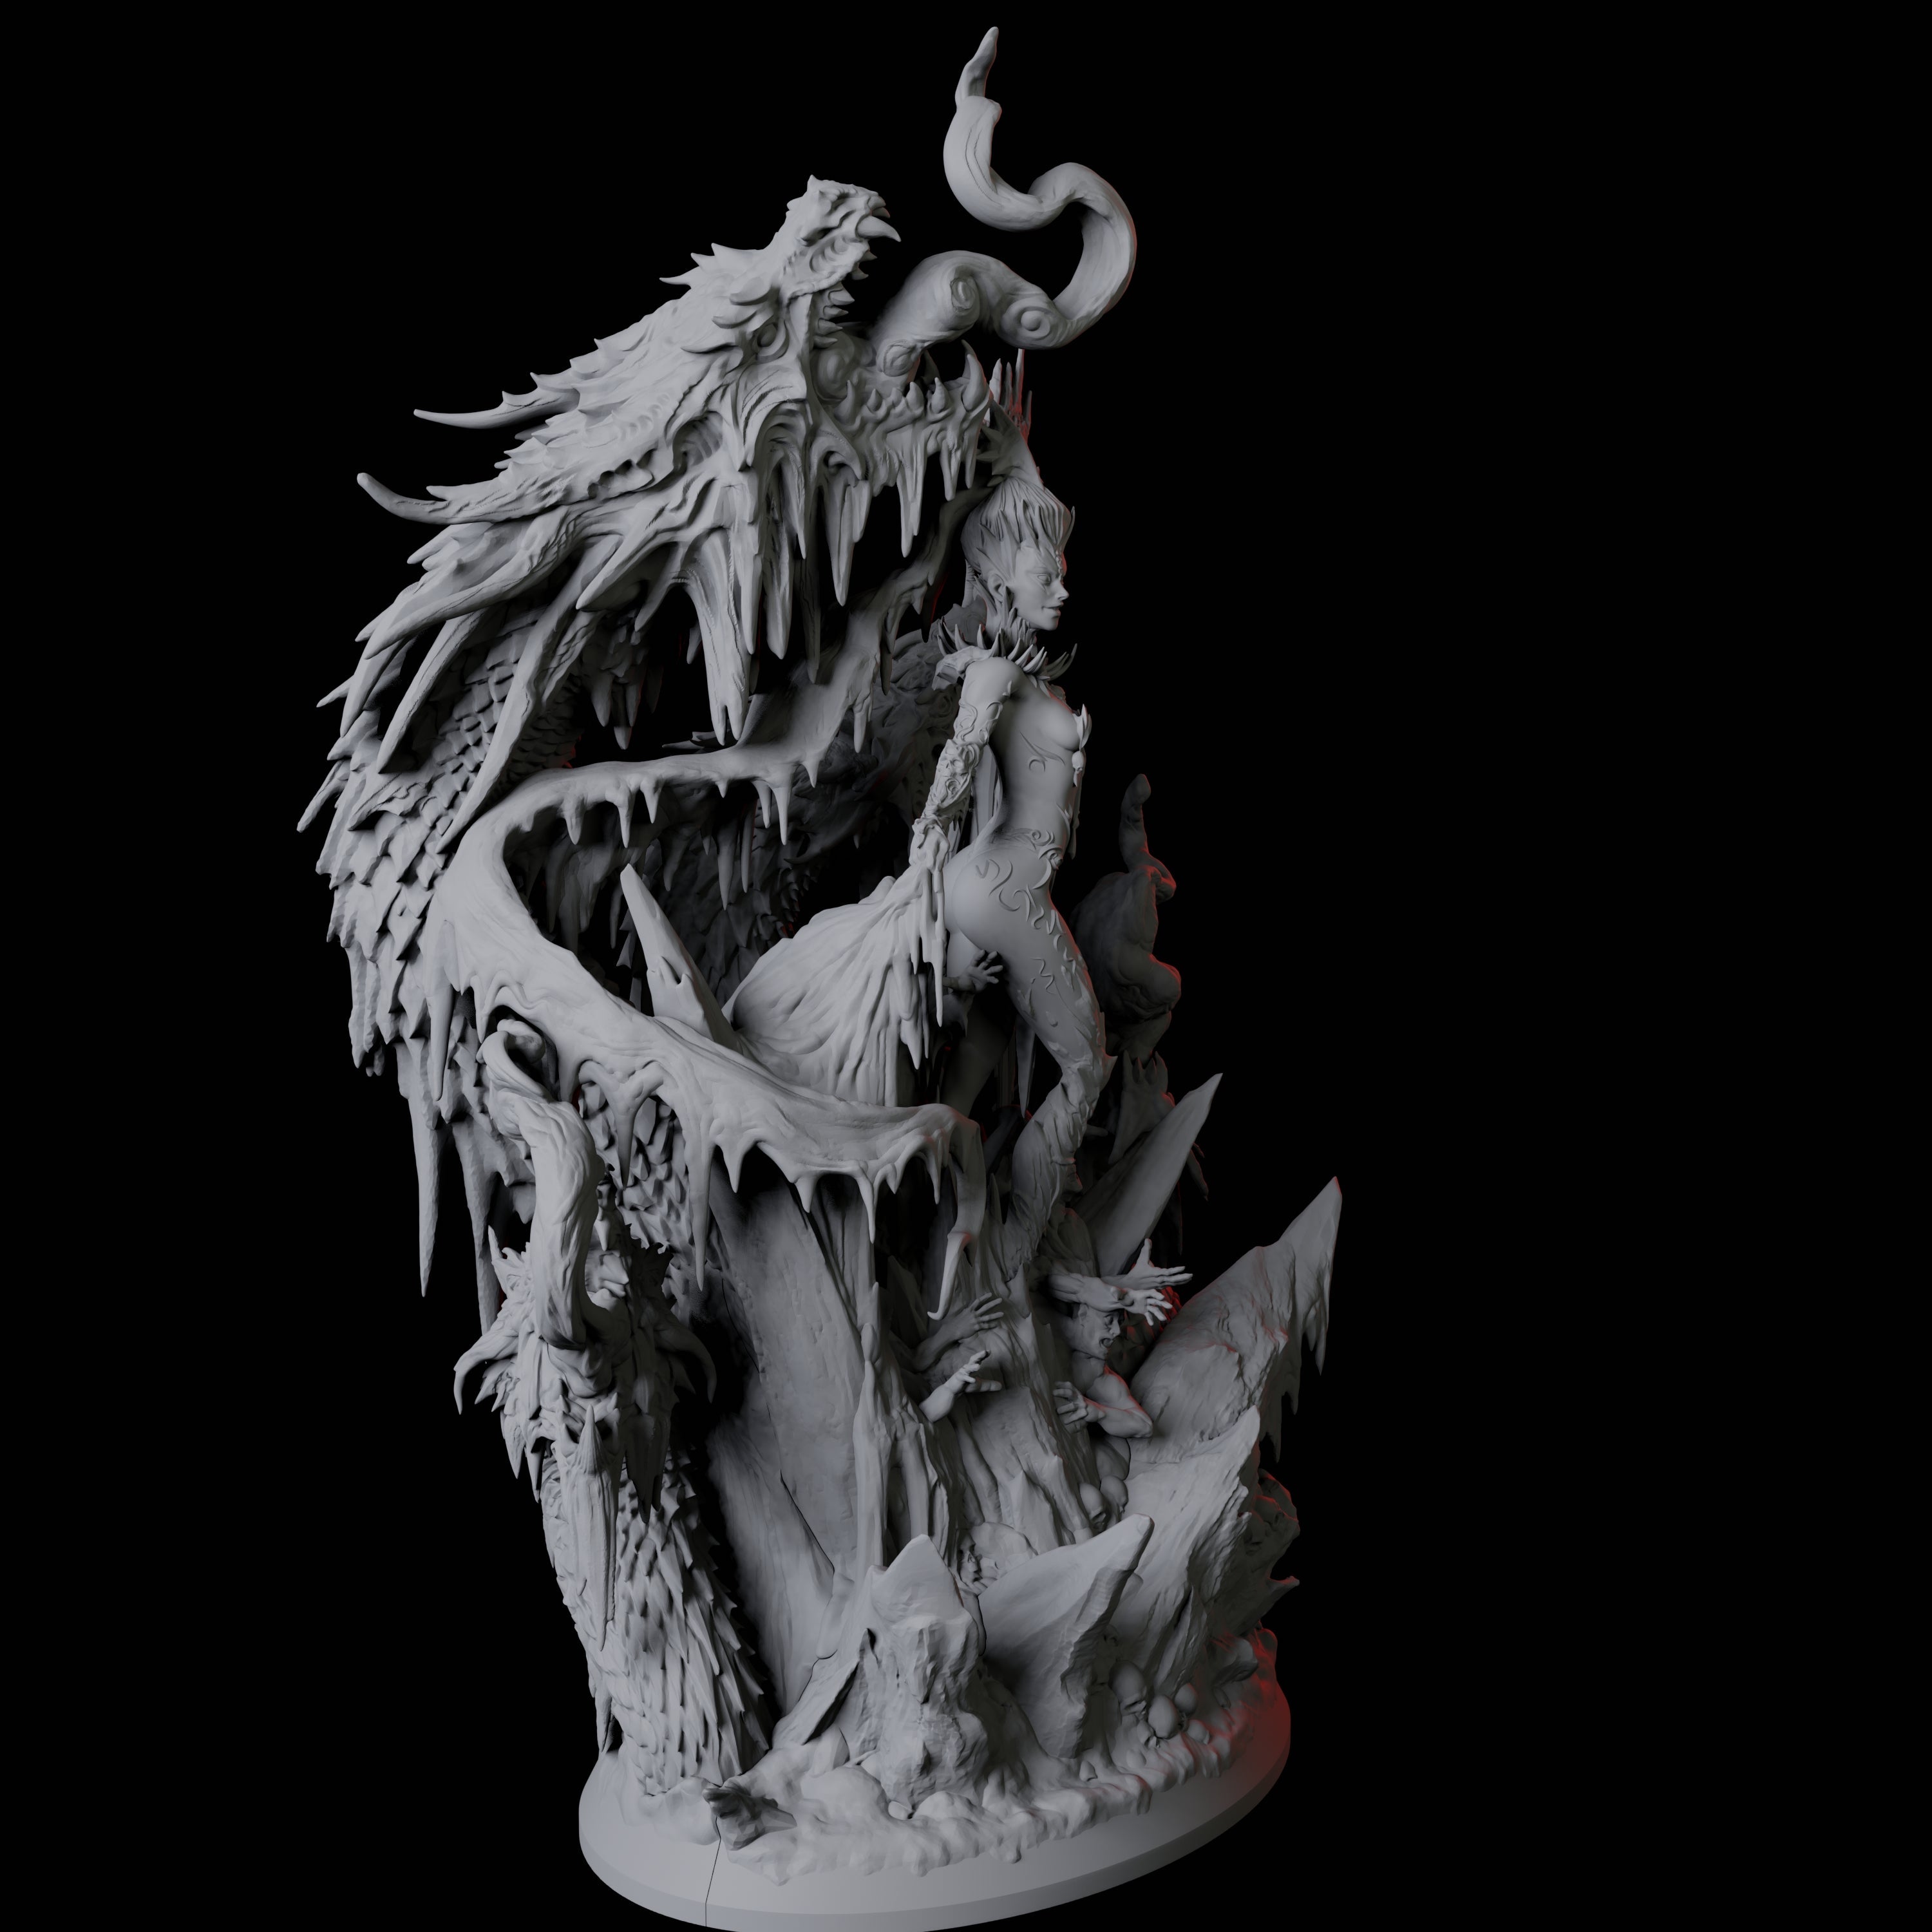 Supreme Archfey Miniature for Dungeons and Dragons, Pathfinder or other TTRPGs